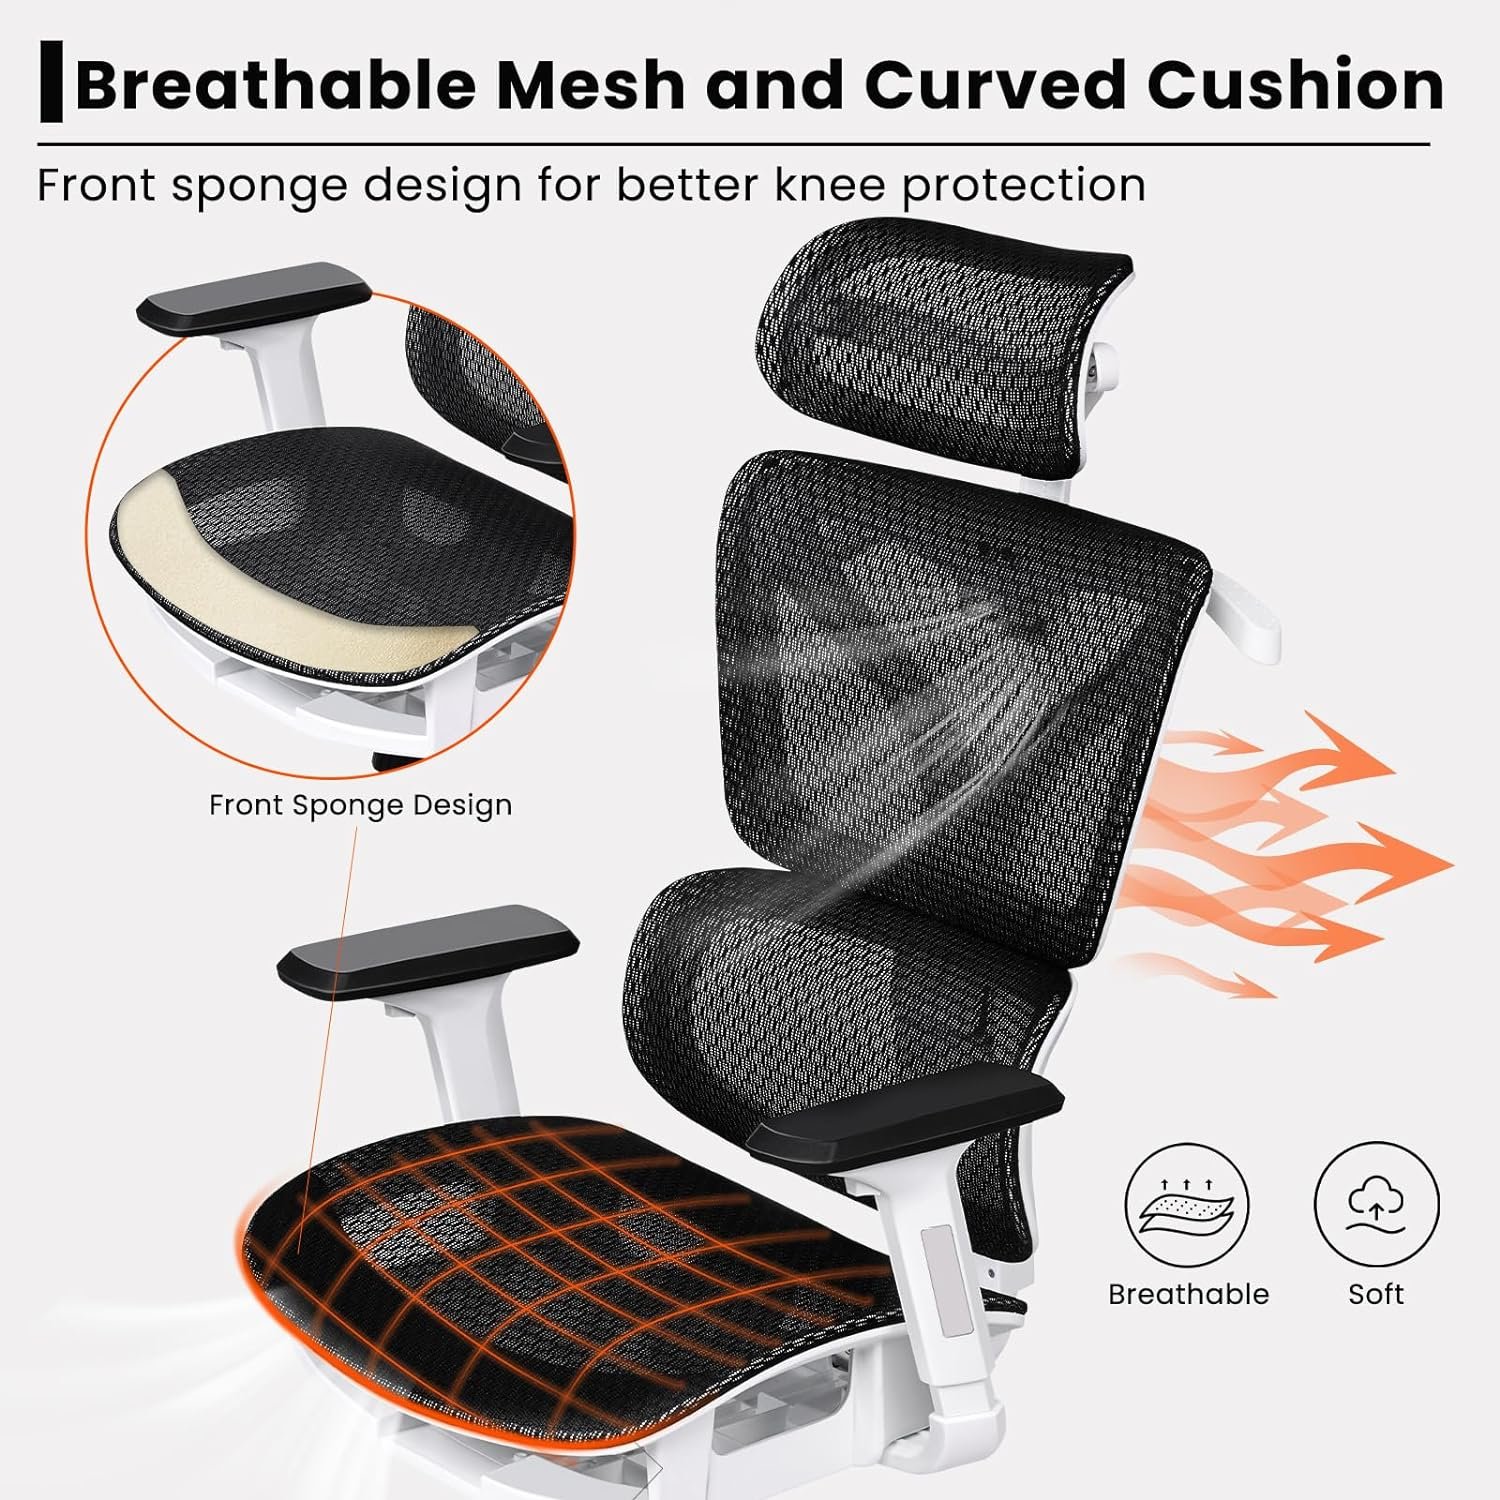 Ergonomic Office Desk Chair with Adjustable Lumbar Support, Computer Gaming Chair with 3D Arms and Headrest, Comfortable Swivel Chair with Sponge Seat Cushion High Back Executive Chairs White